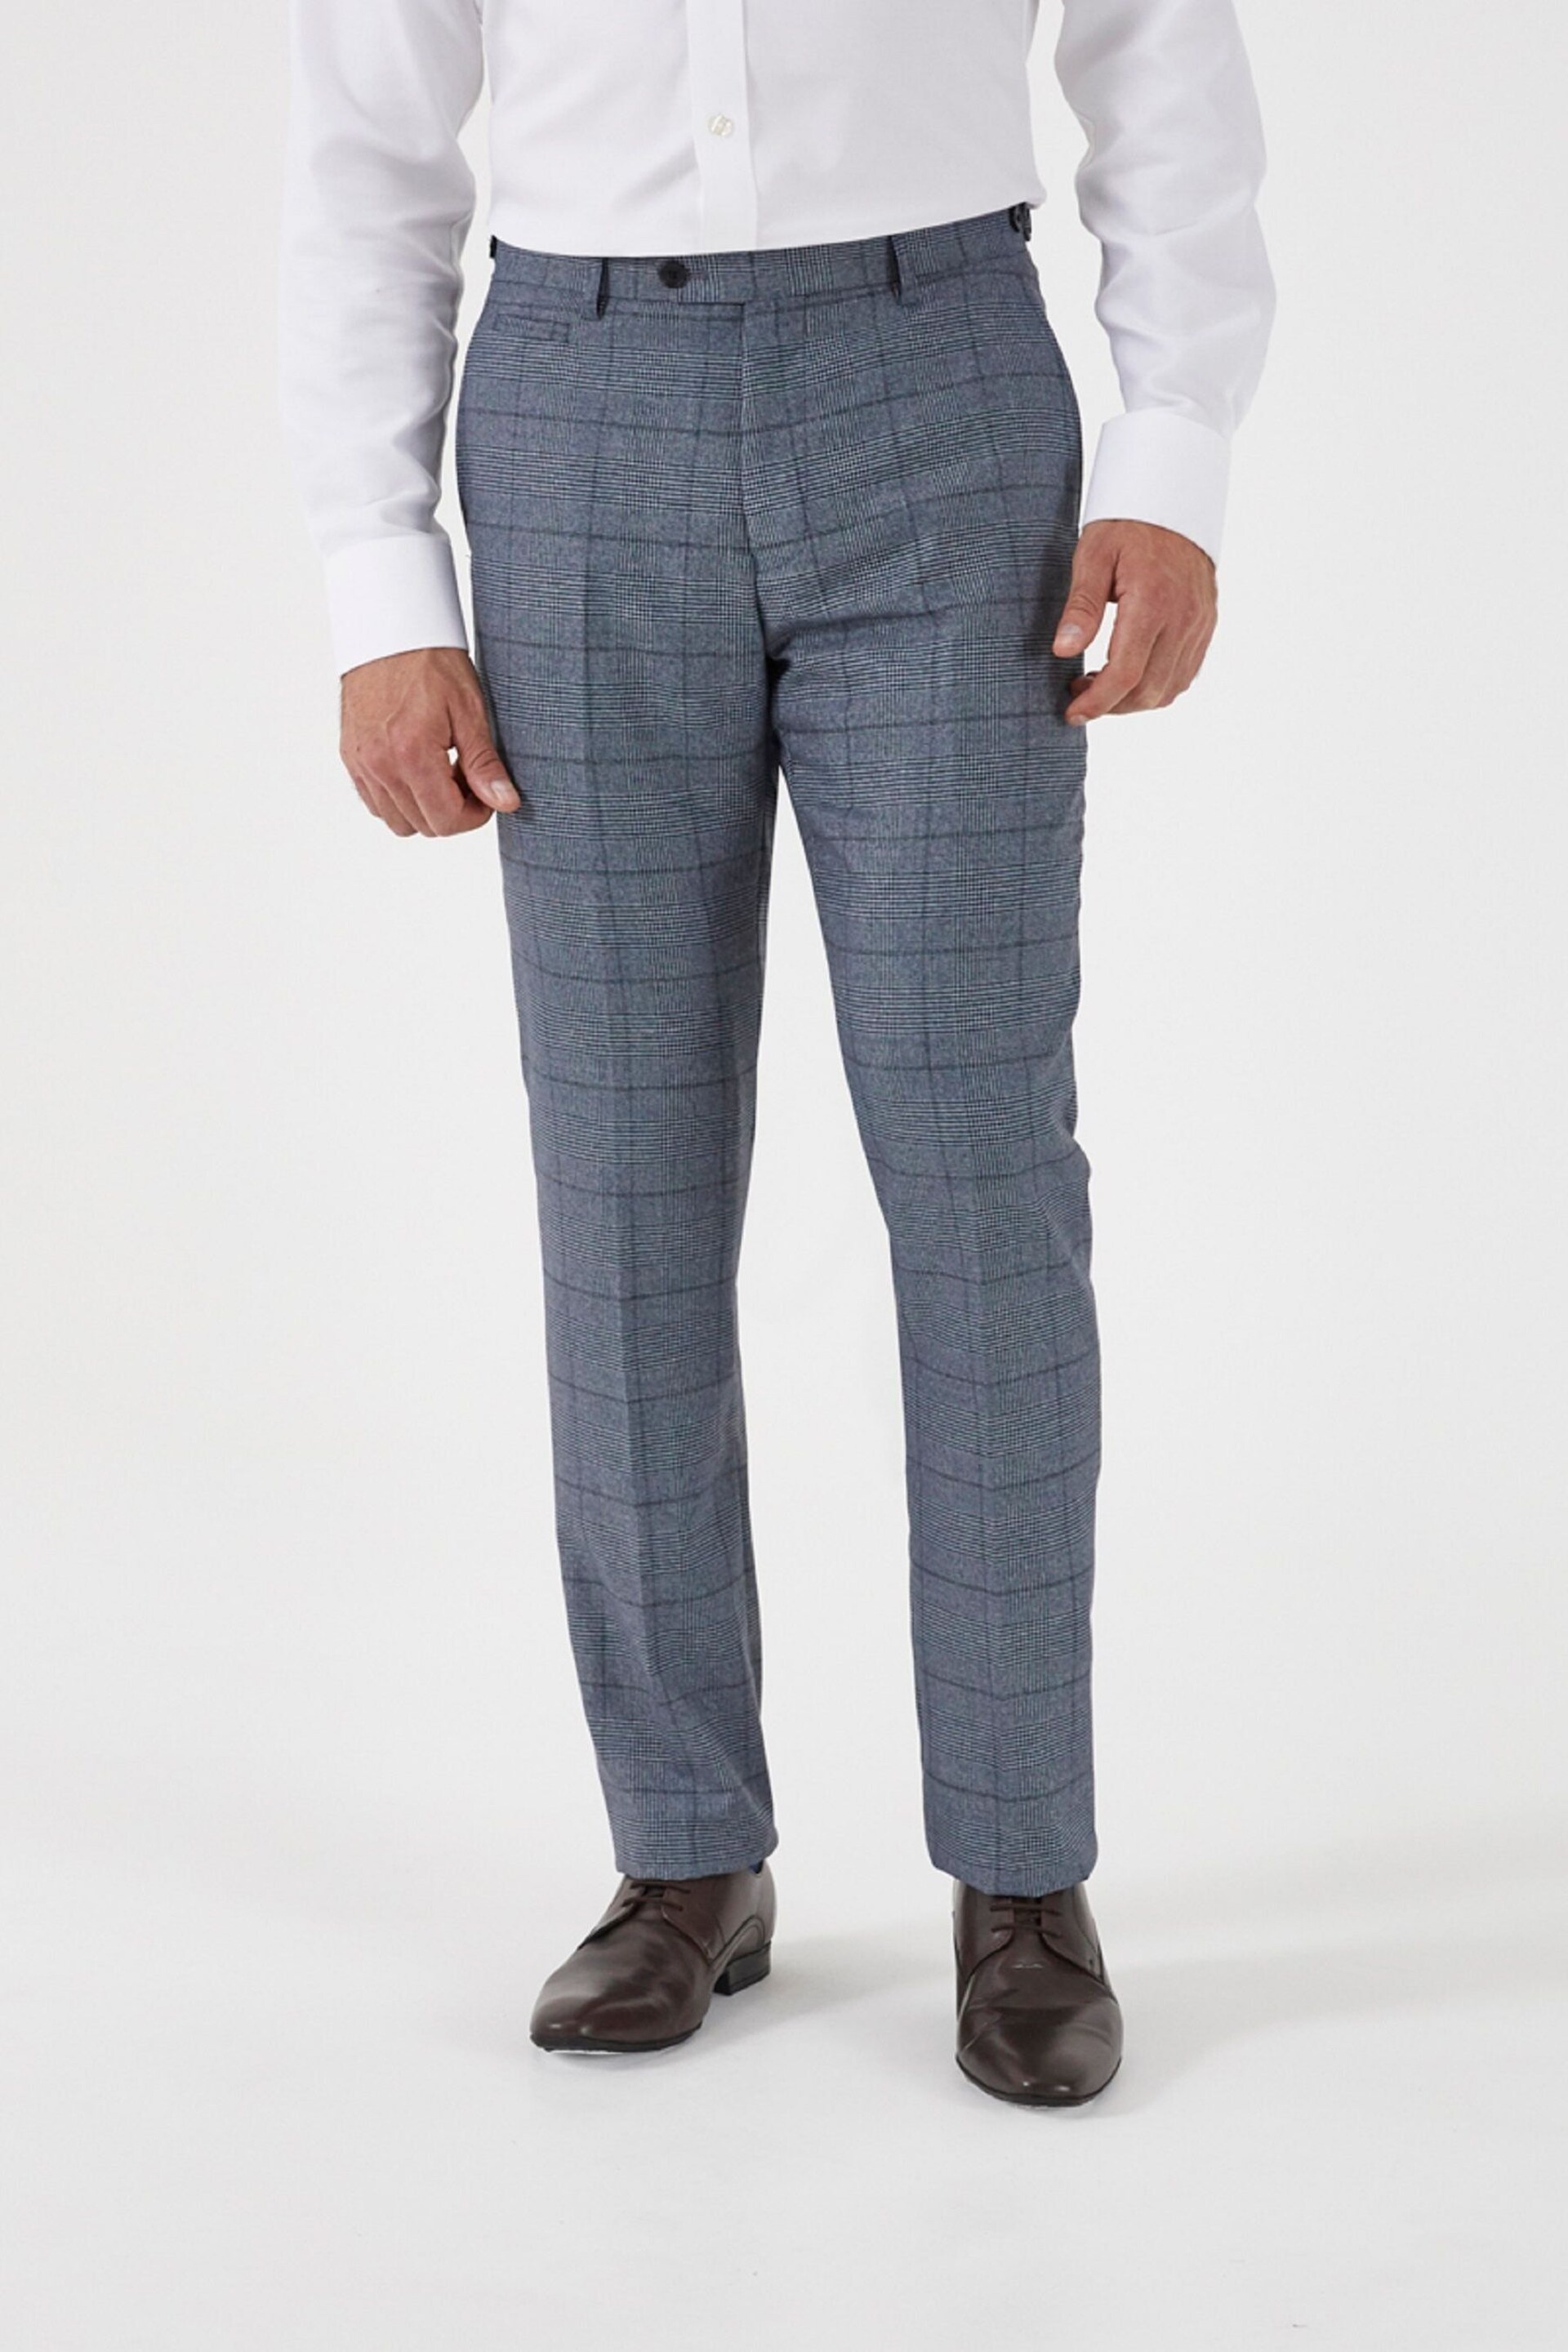 Skopes Reece Blue Check Tailored Fit Suit Trousers - Image 1 of 3